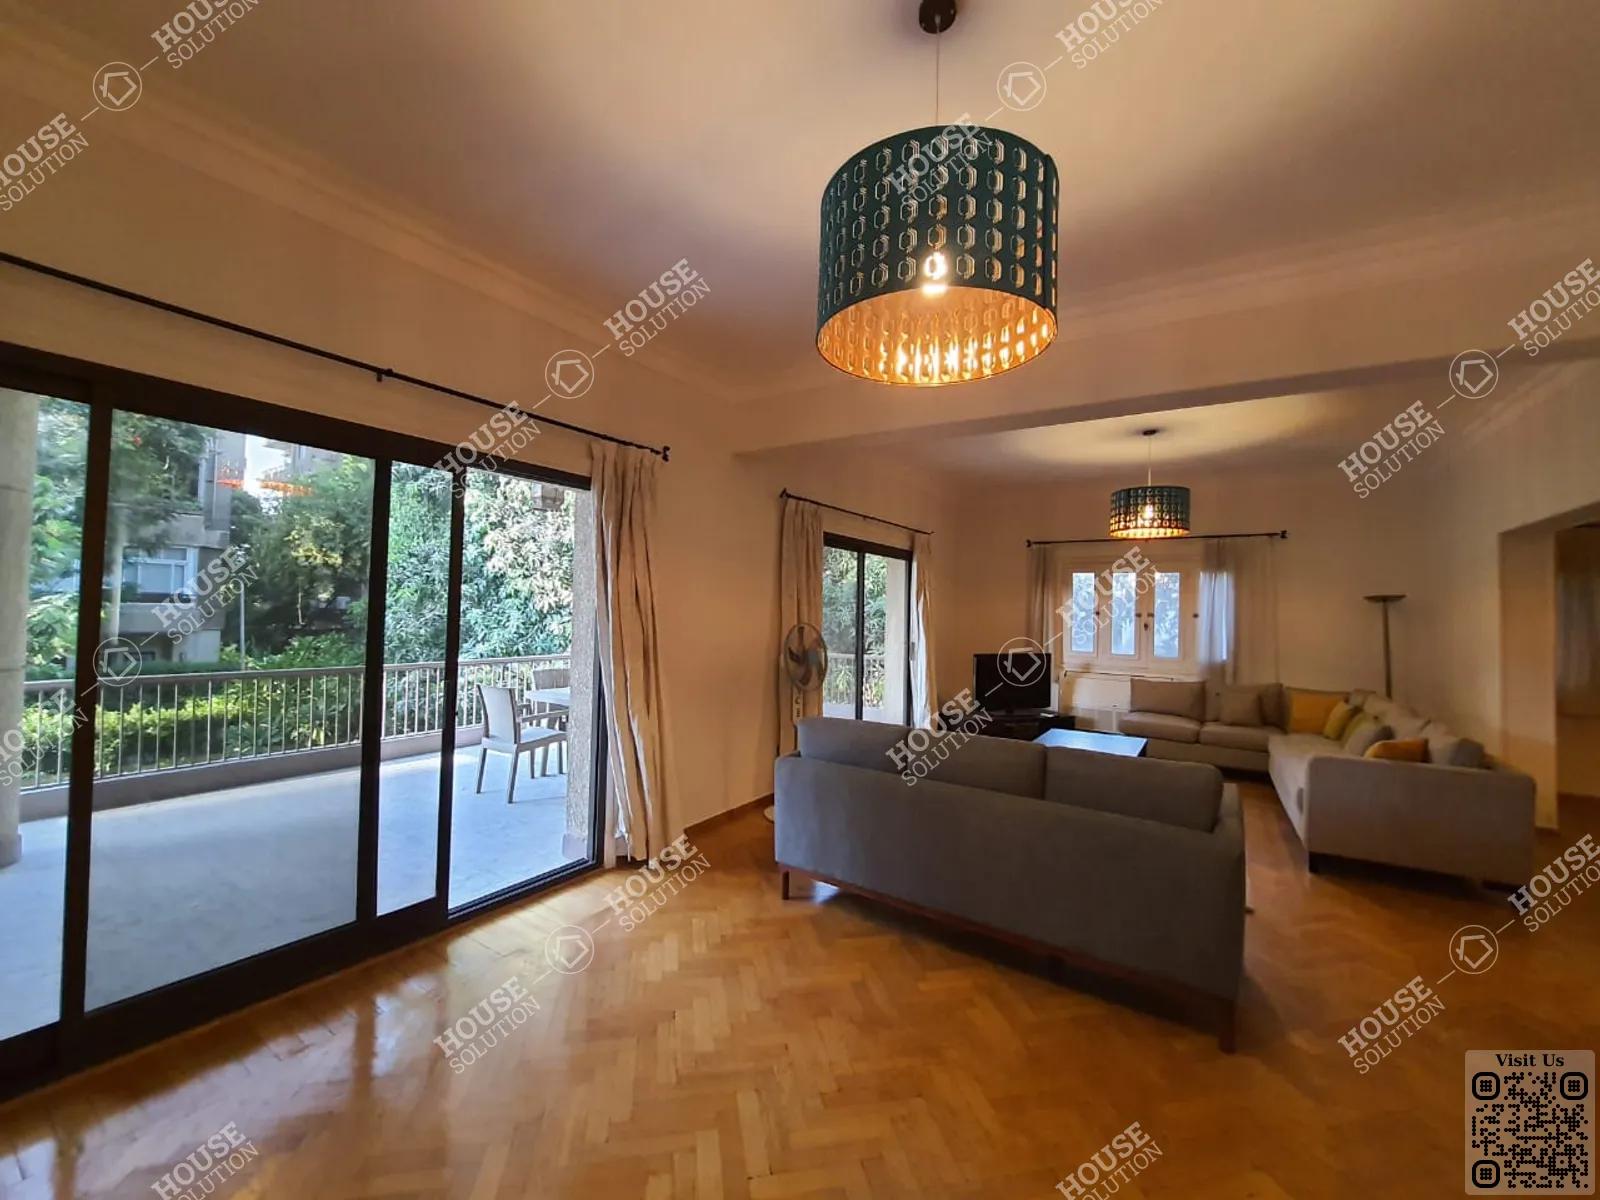 RECEPTION  @ Apartments For Rent In Maadi Maadi Degla Area: 300 m² consists of 4 Bedrooms 3 Bathrooms Furnished 5 stars #5139-0